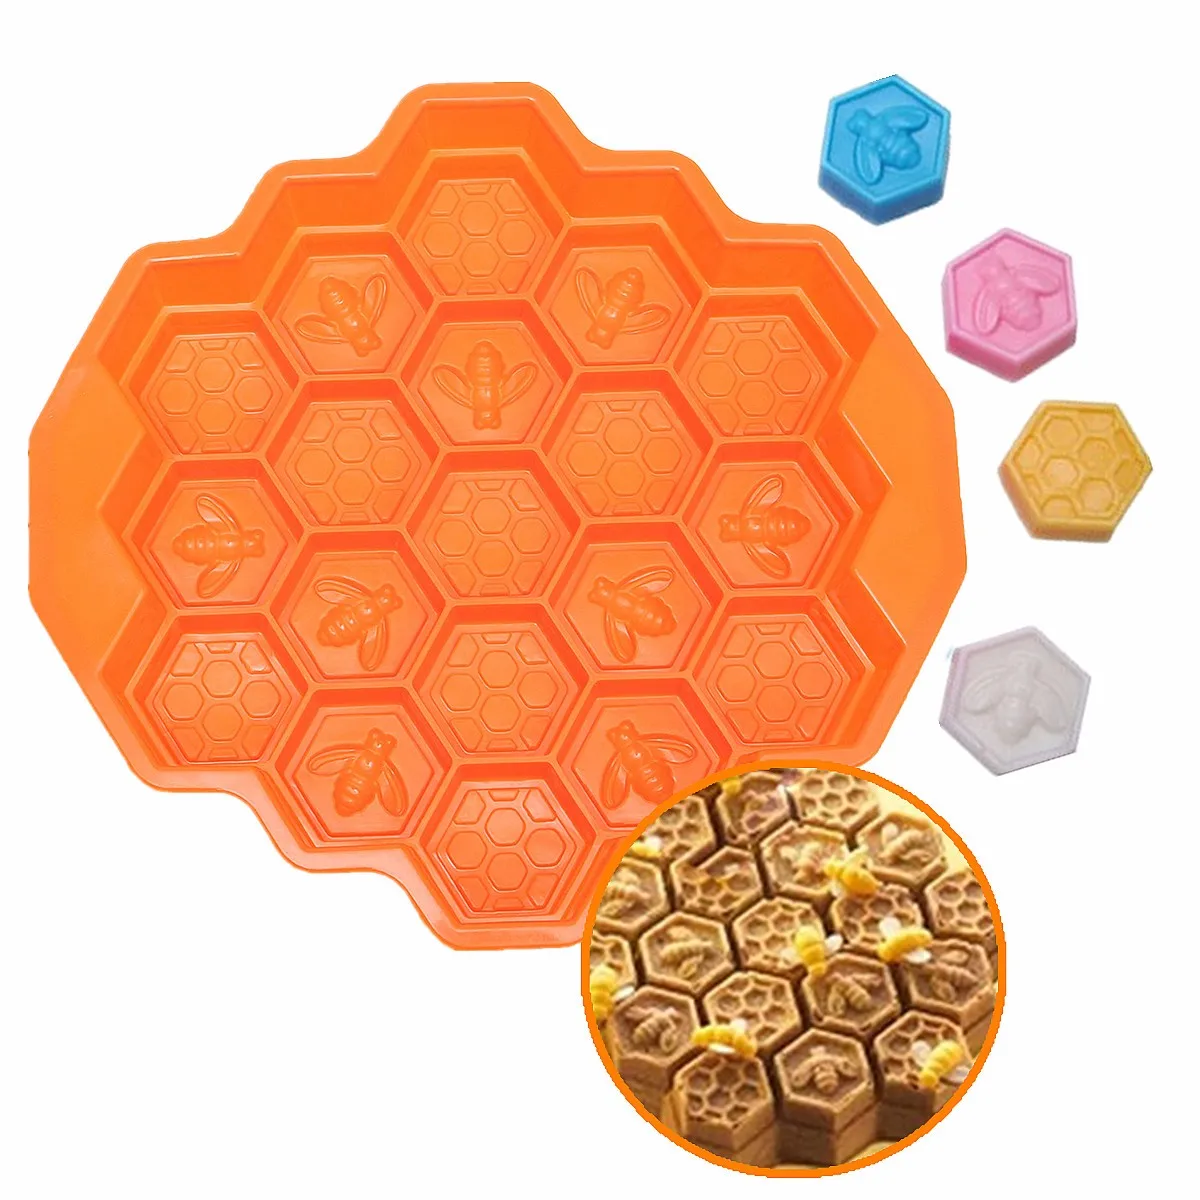 19 Cell Honey Comb Silicone Cake Mold Bees Soap Mould Beeswax Ice Jelly Chocolate Pan Diy Cake 